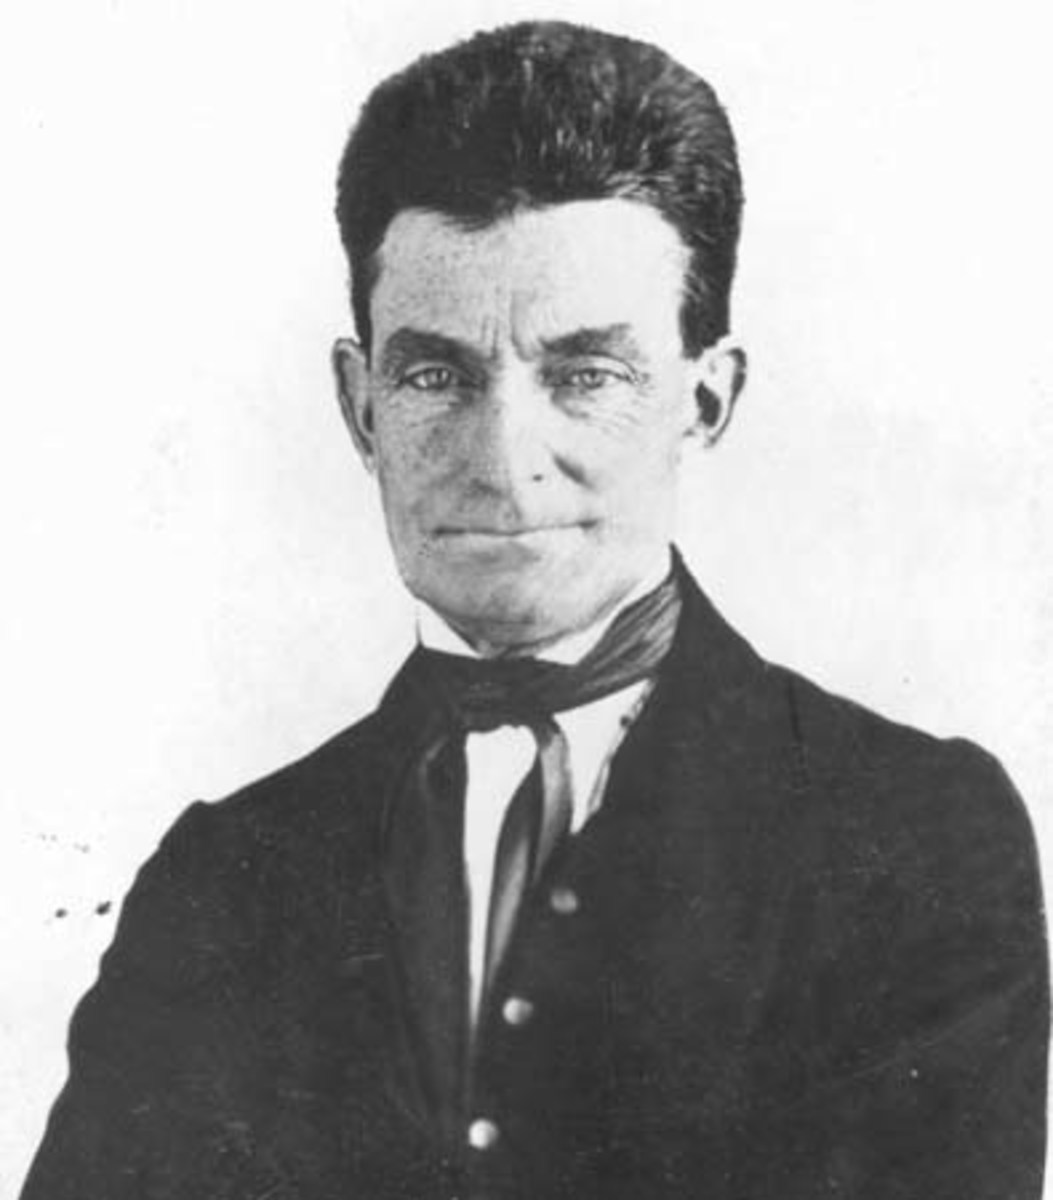 John Brown in his younger days.